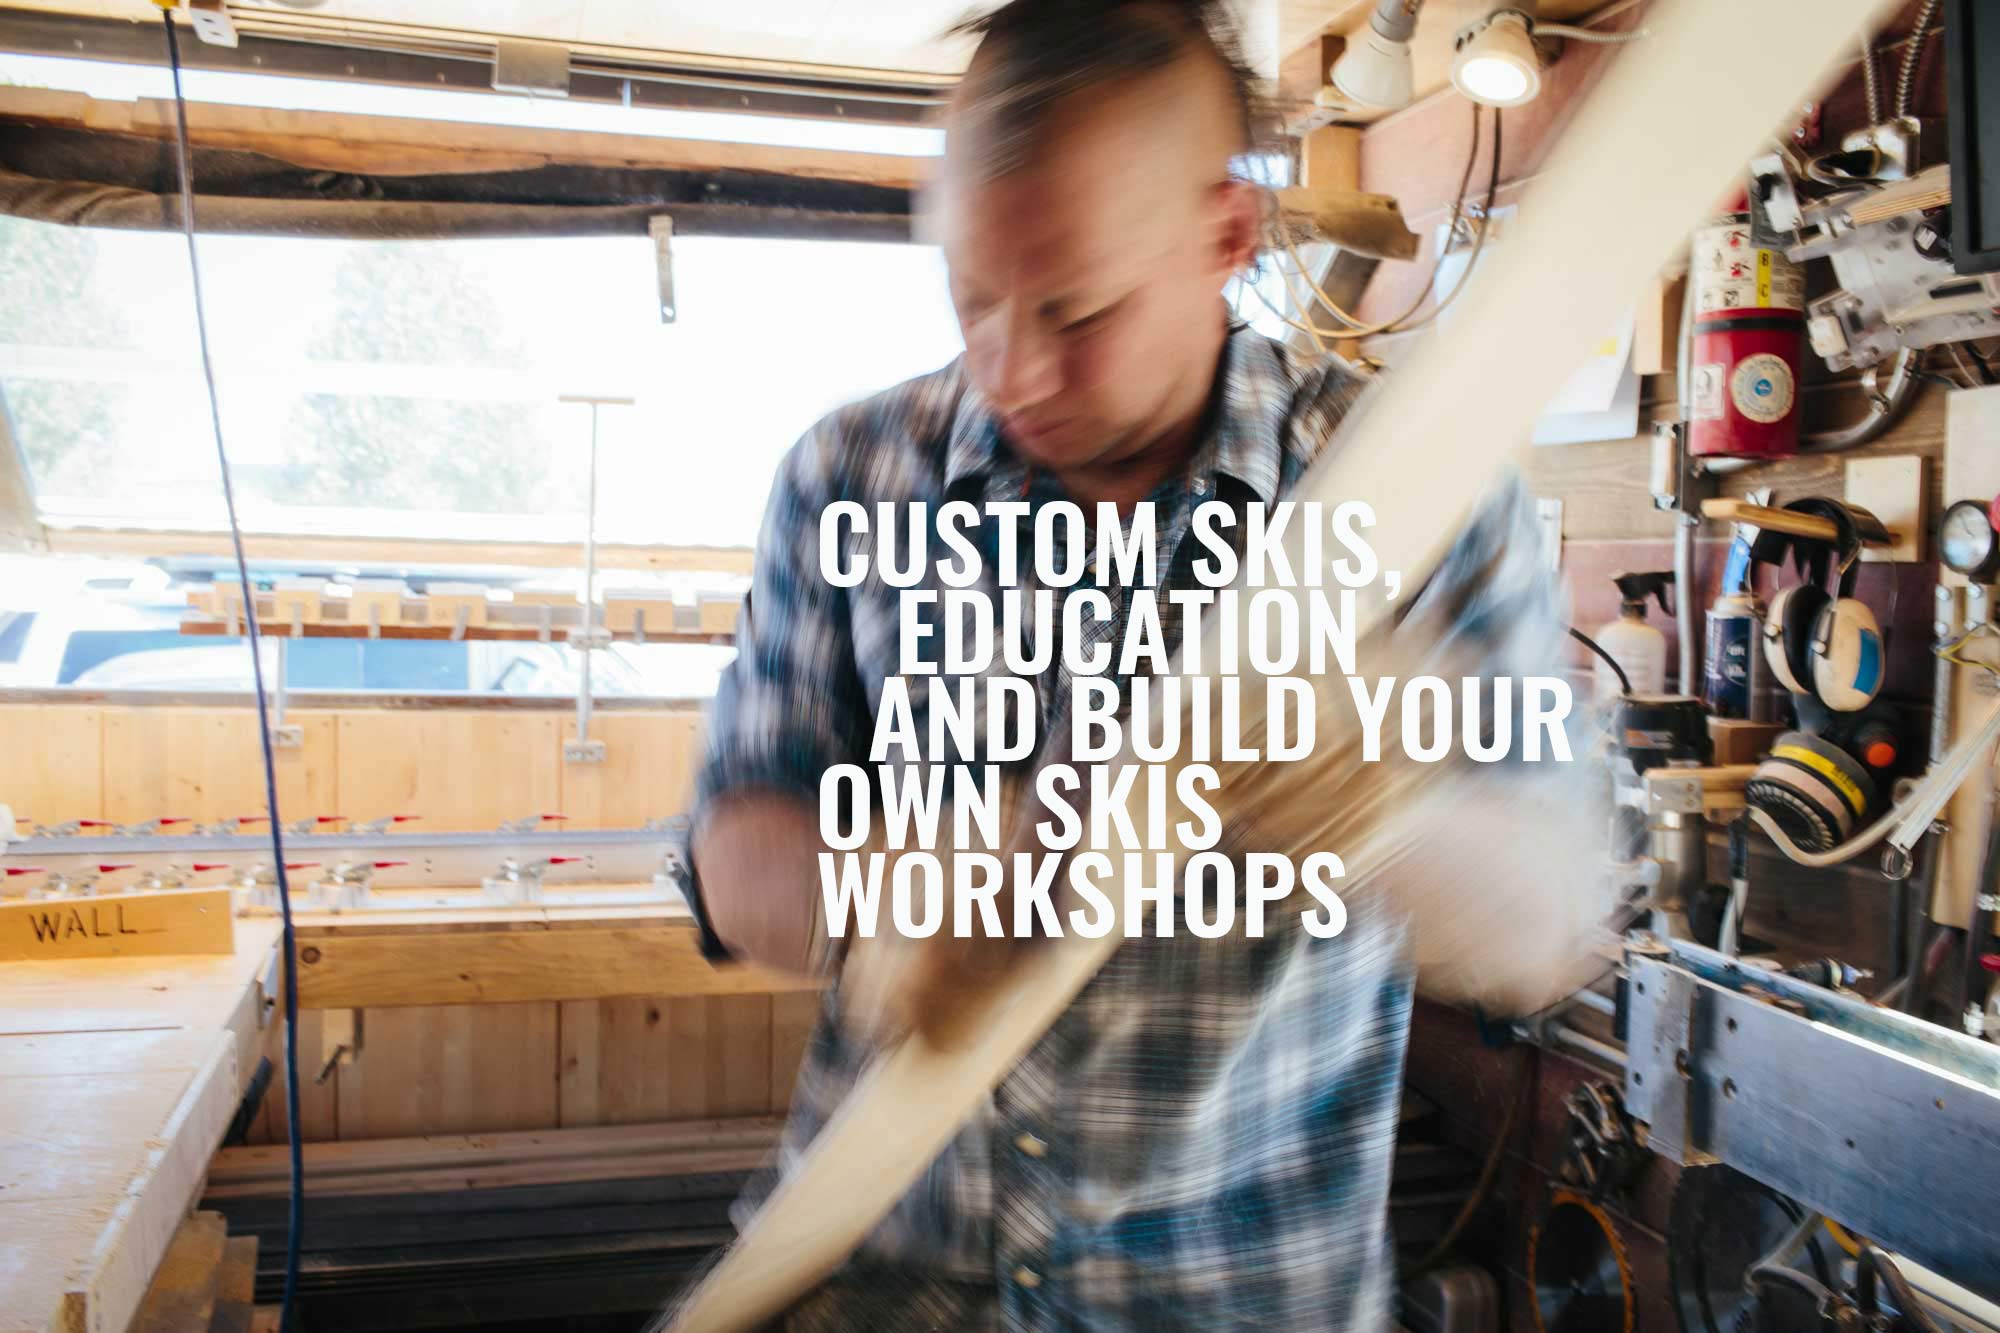 custom skis, education and build your own skis workshops